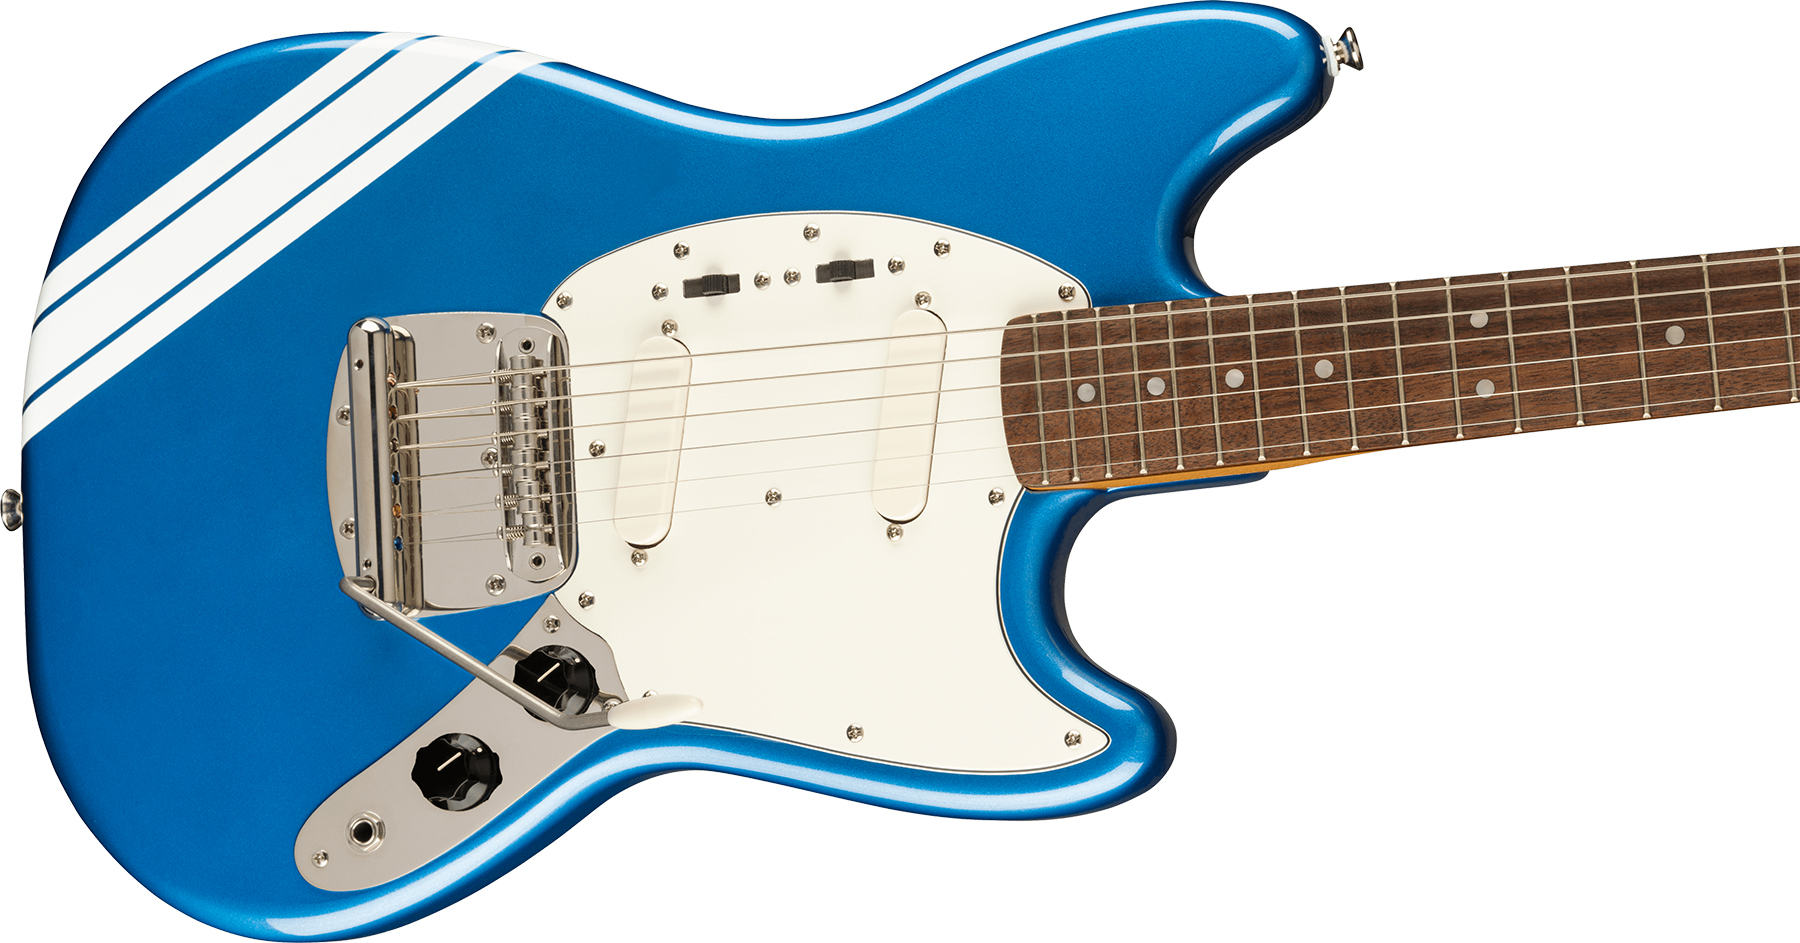 Squier Mustang  Classic Vibe 60s Competition Fsr Ltd Lau - Lake Placid Blue W/ Olympic White Stripes - Retro rock electric guitar - Variation 2